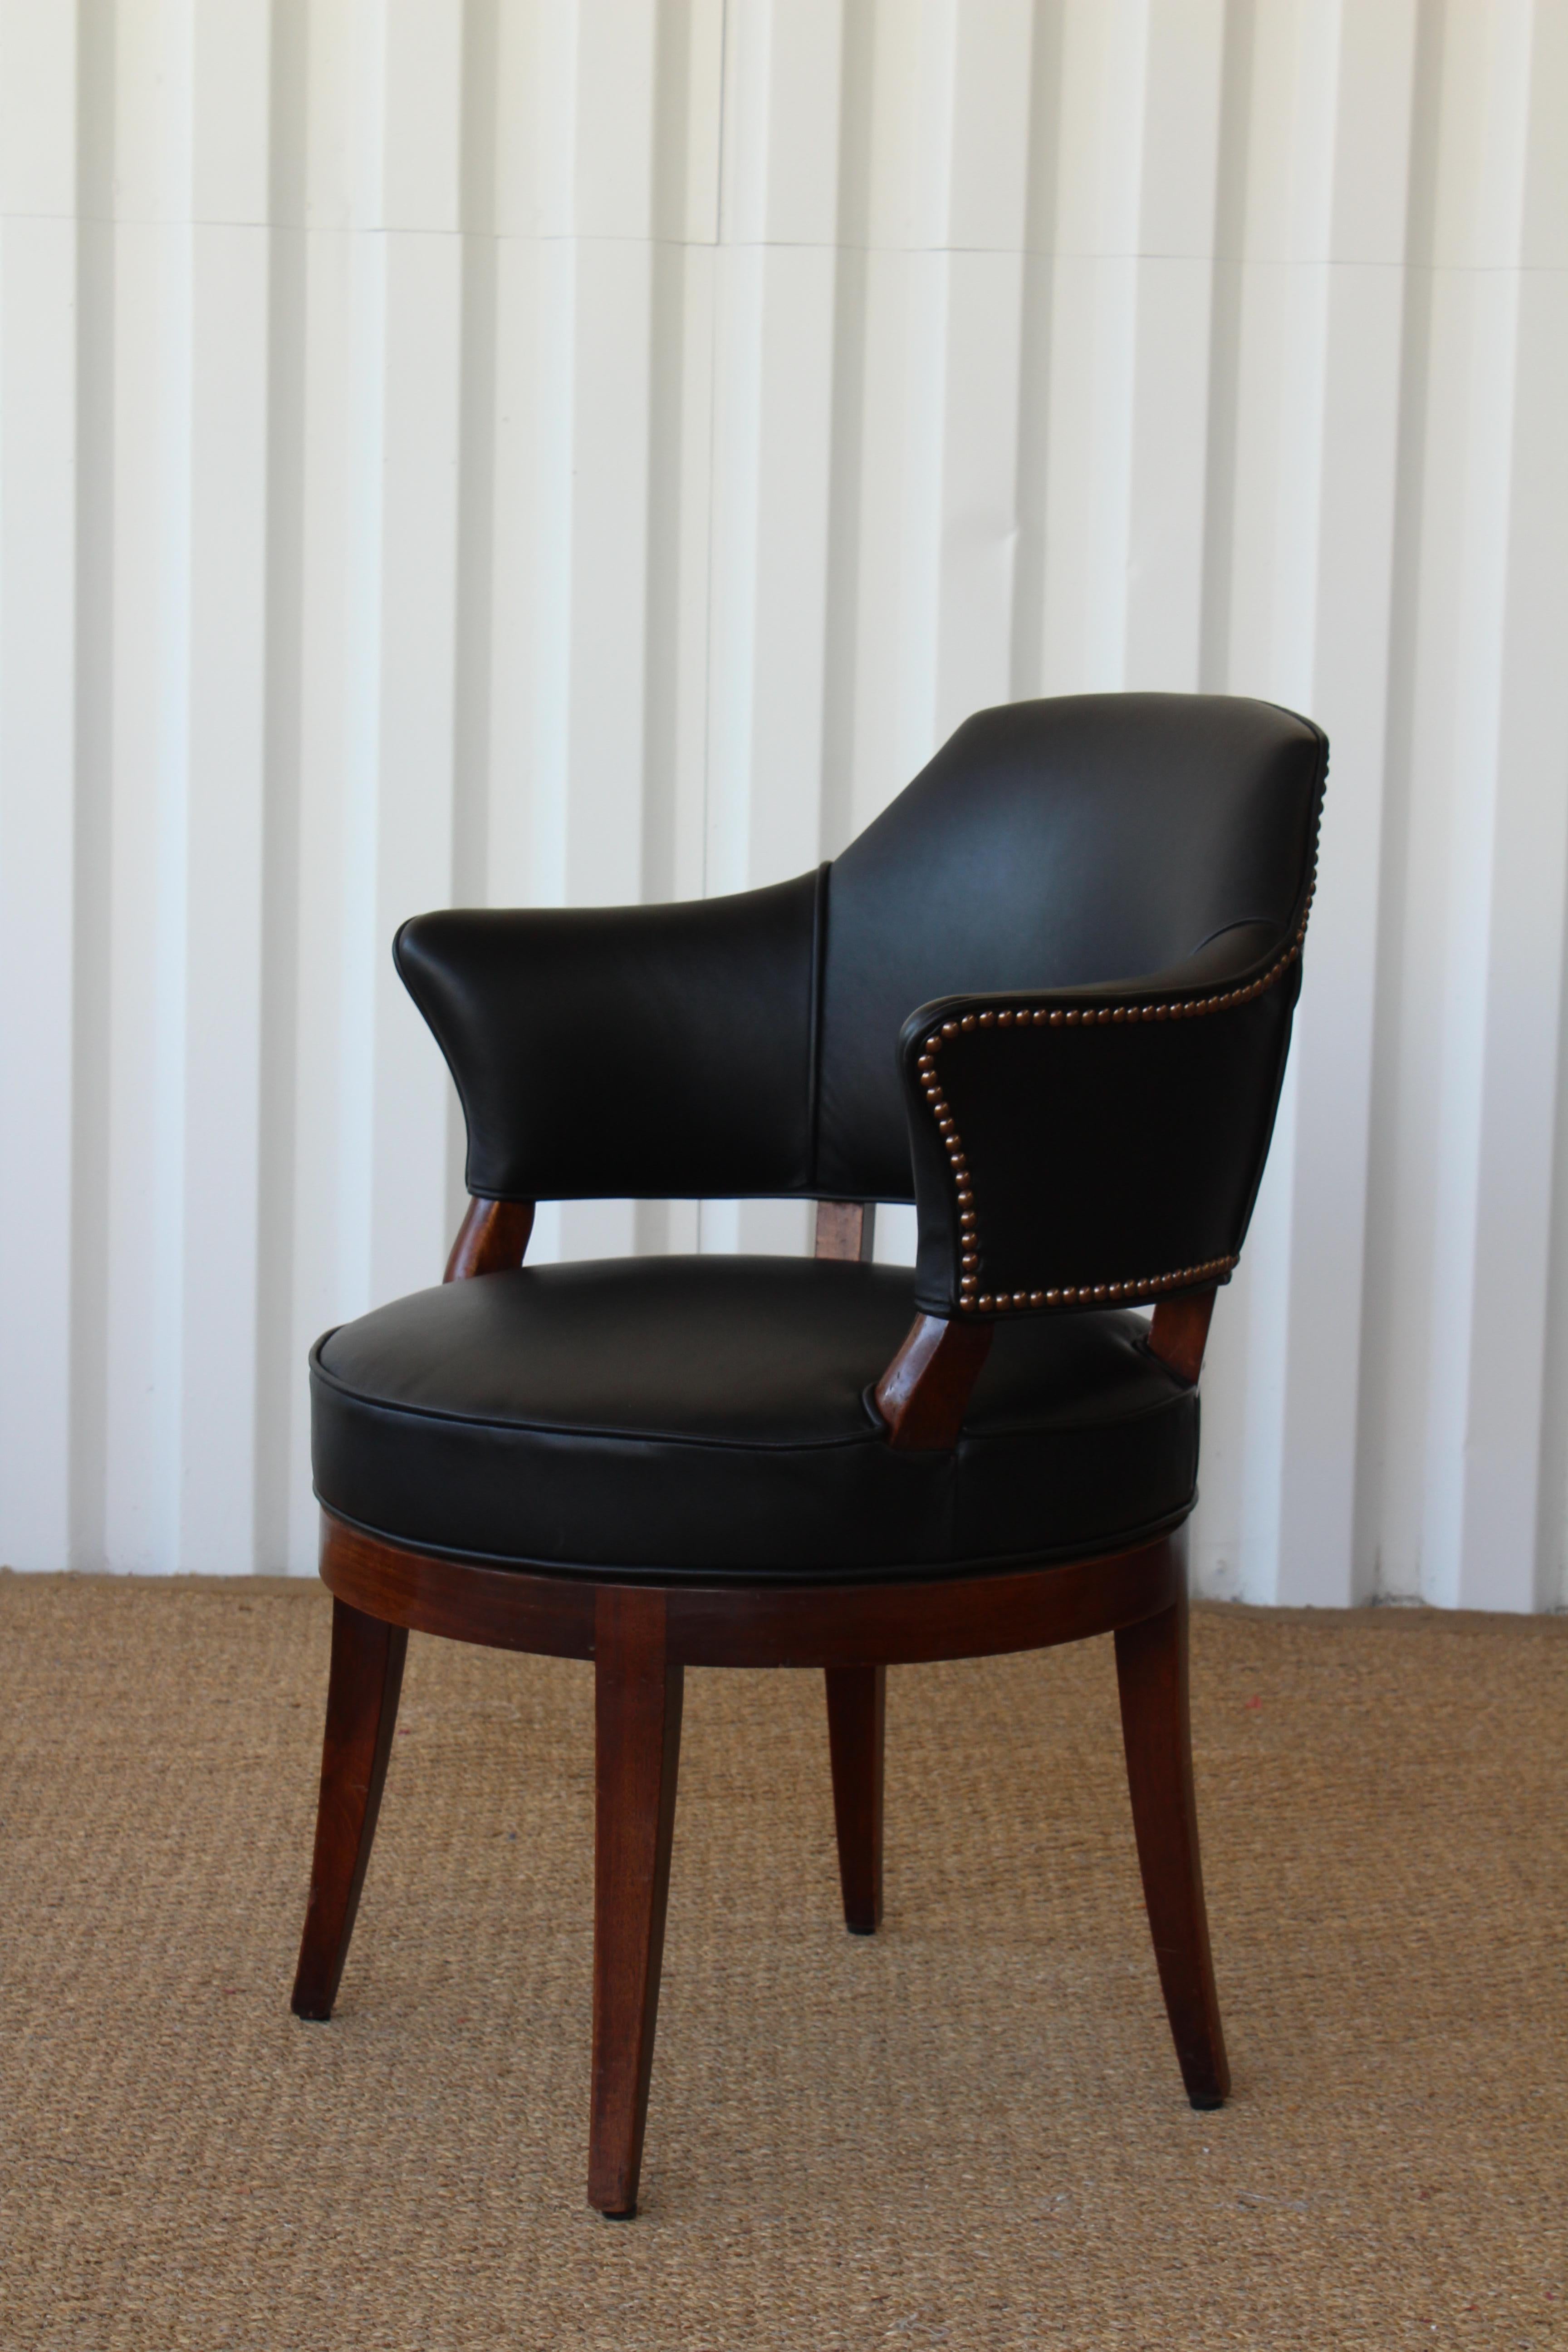 Walnut swiveling desk chair reupholstered in black leather with antique nailhead details. Chair rotates 360 degrees. Walnut frame shows minor signs of wear.